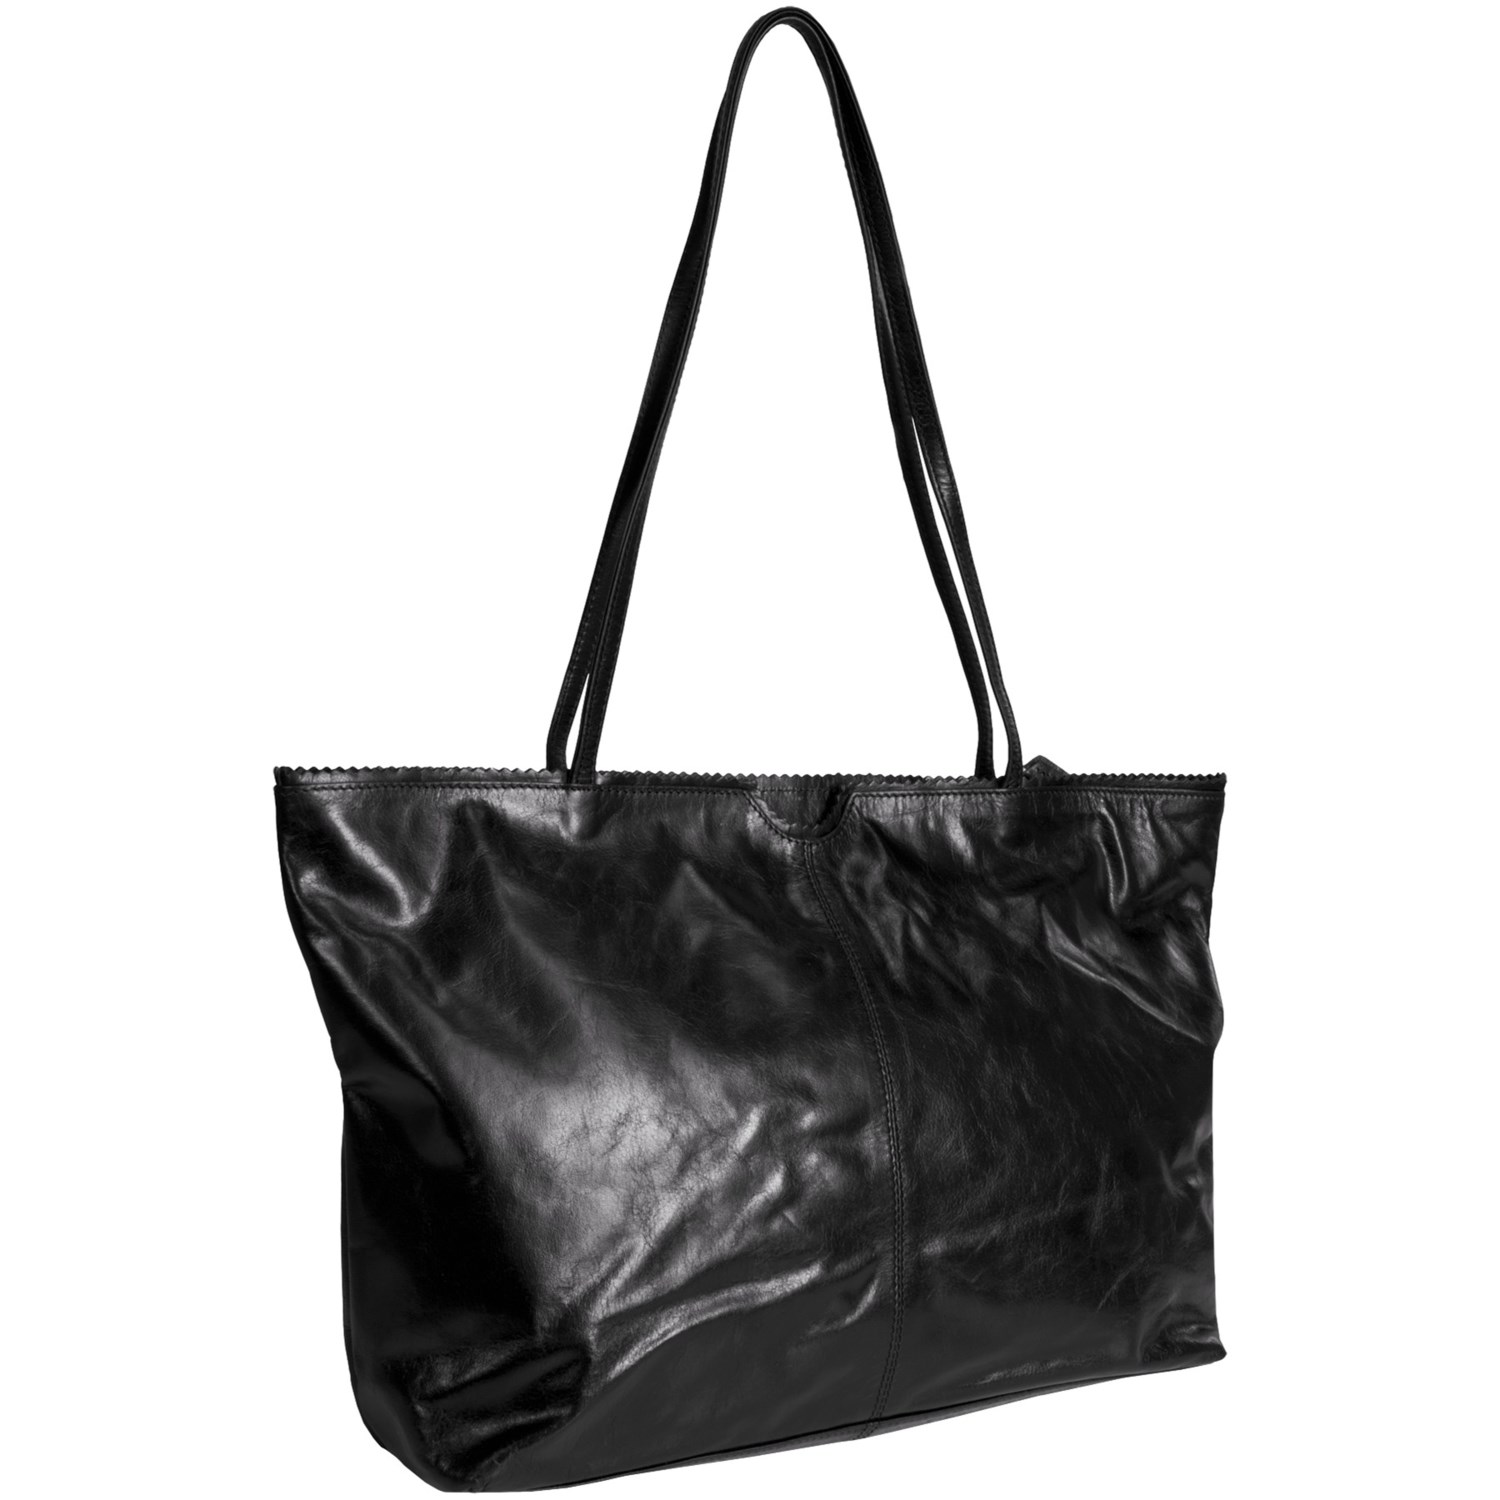 Latico Leathers East West Shopping Tote Bag - Leather - Save 66%